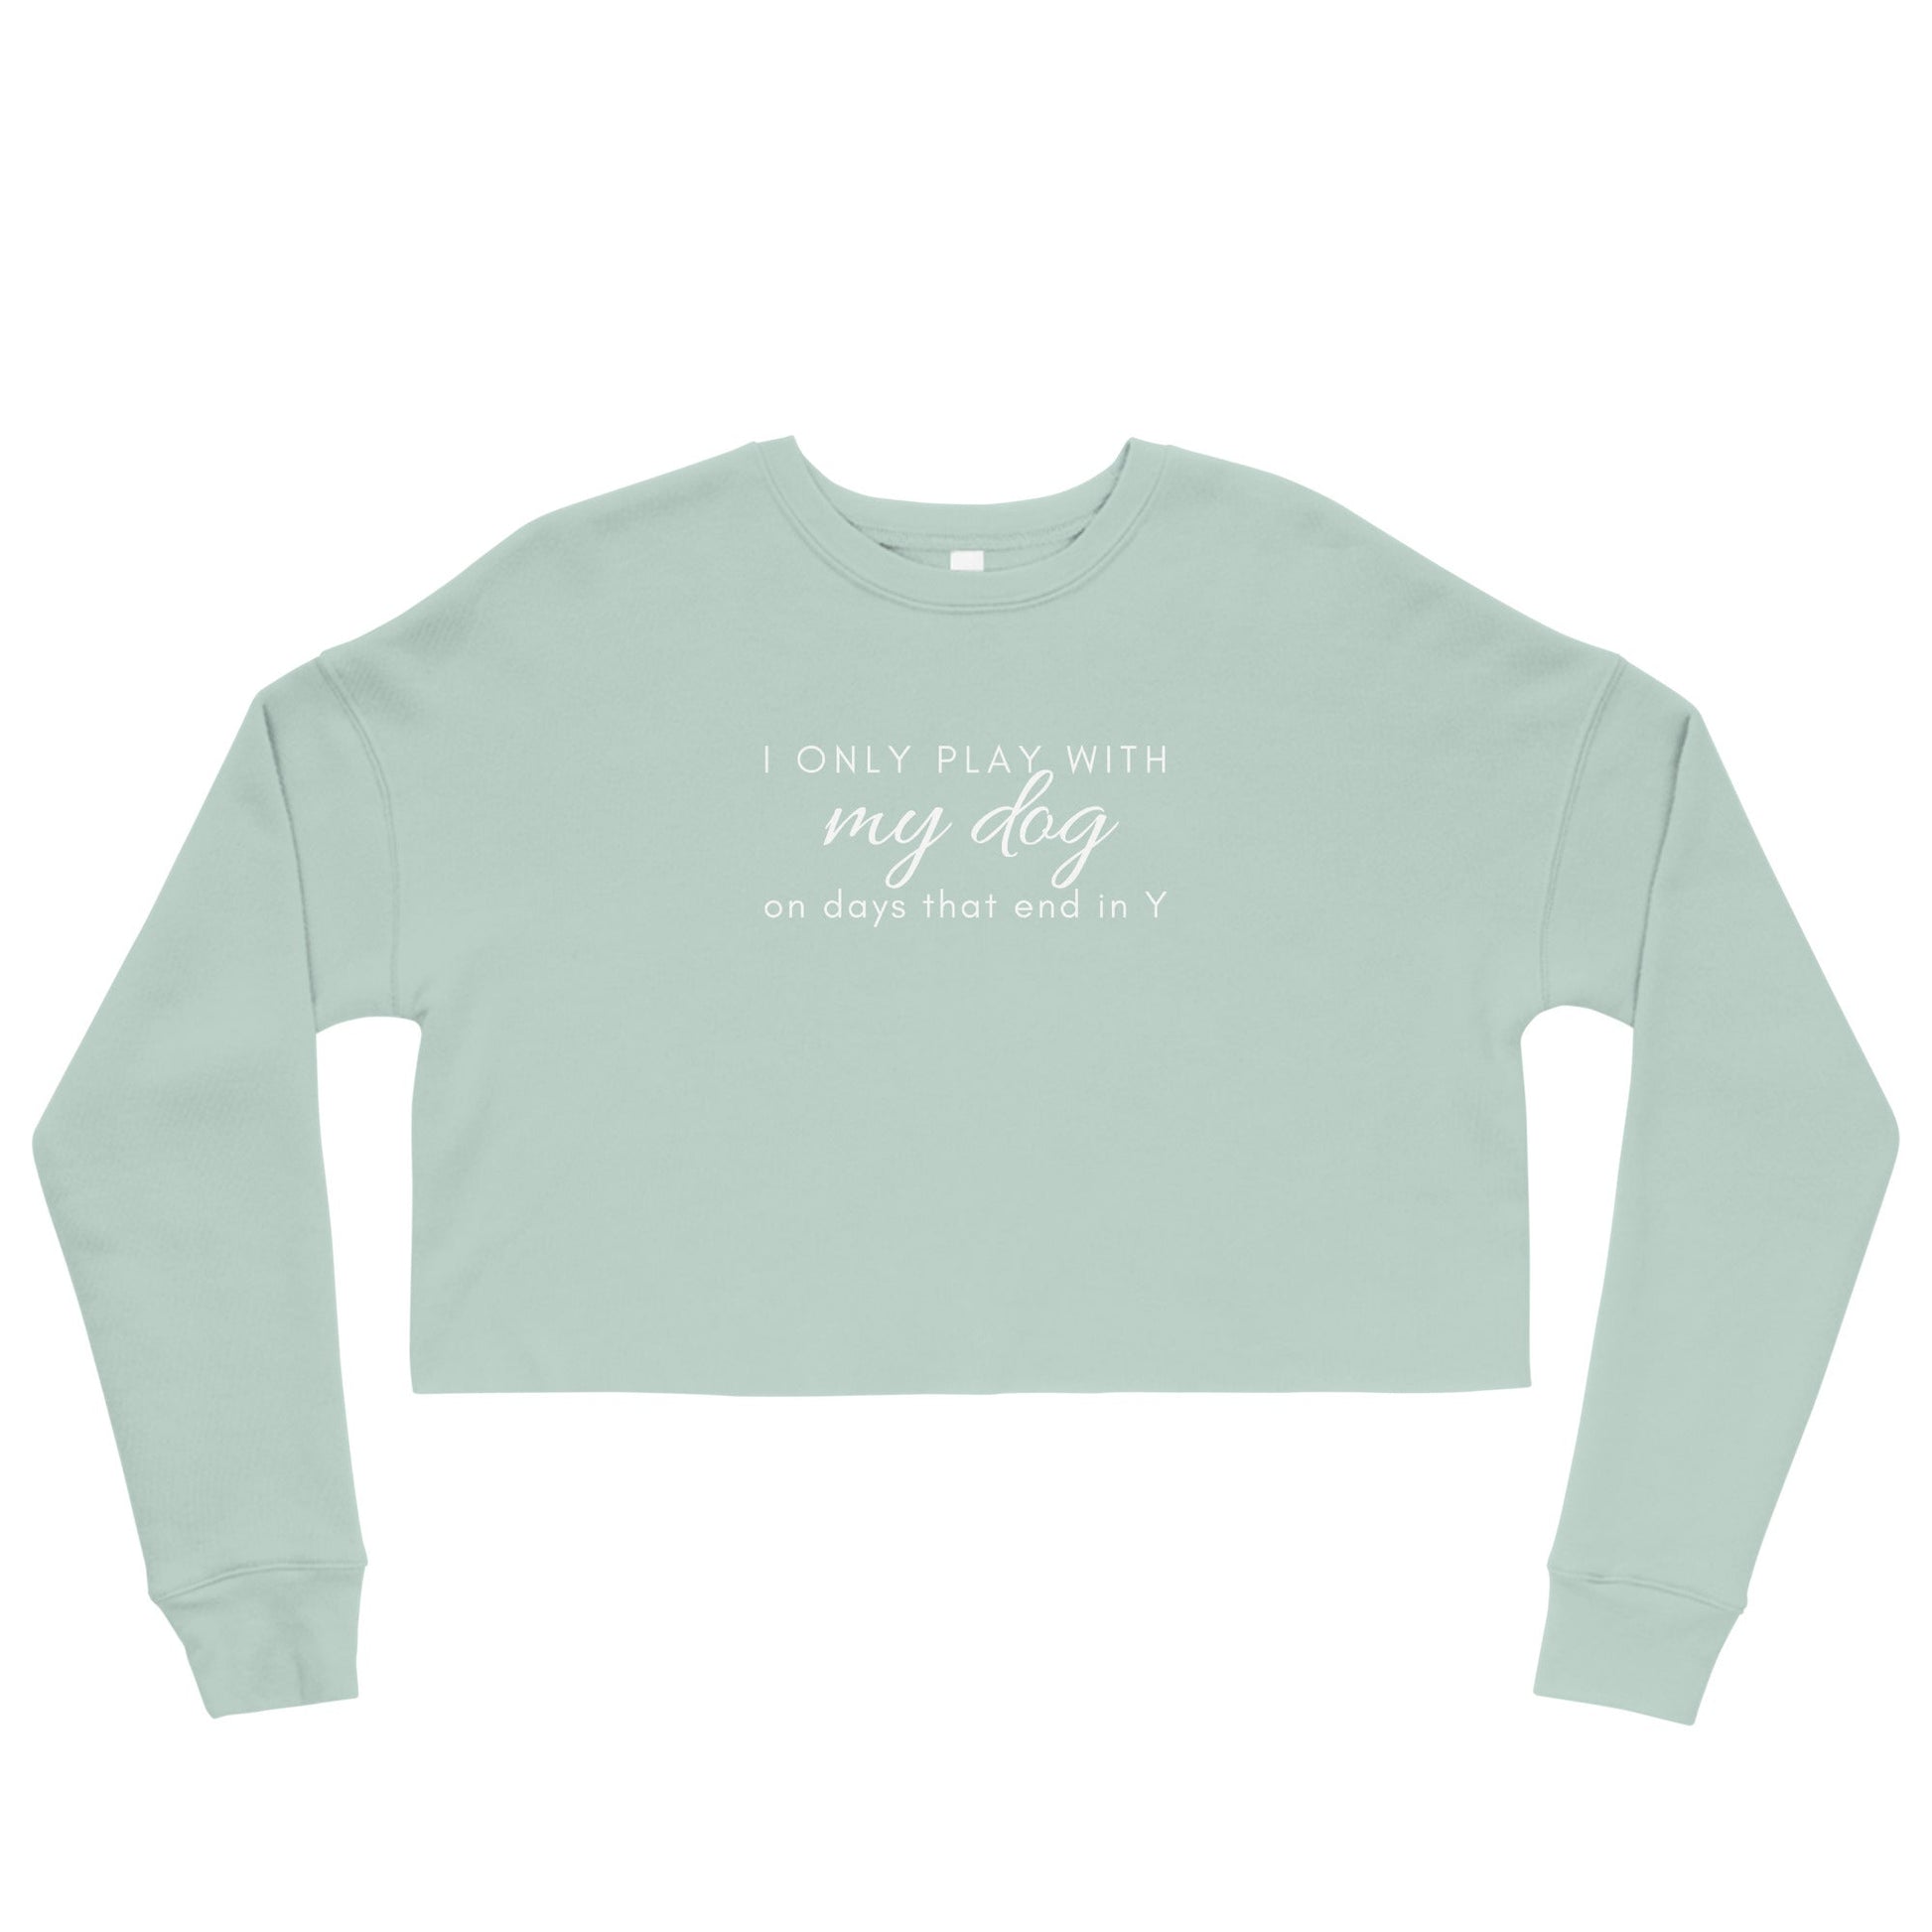 Plays with Dogs Crop Sweatshirt - Dusty Blue / S